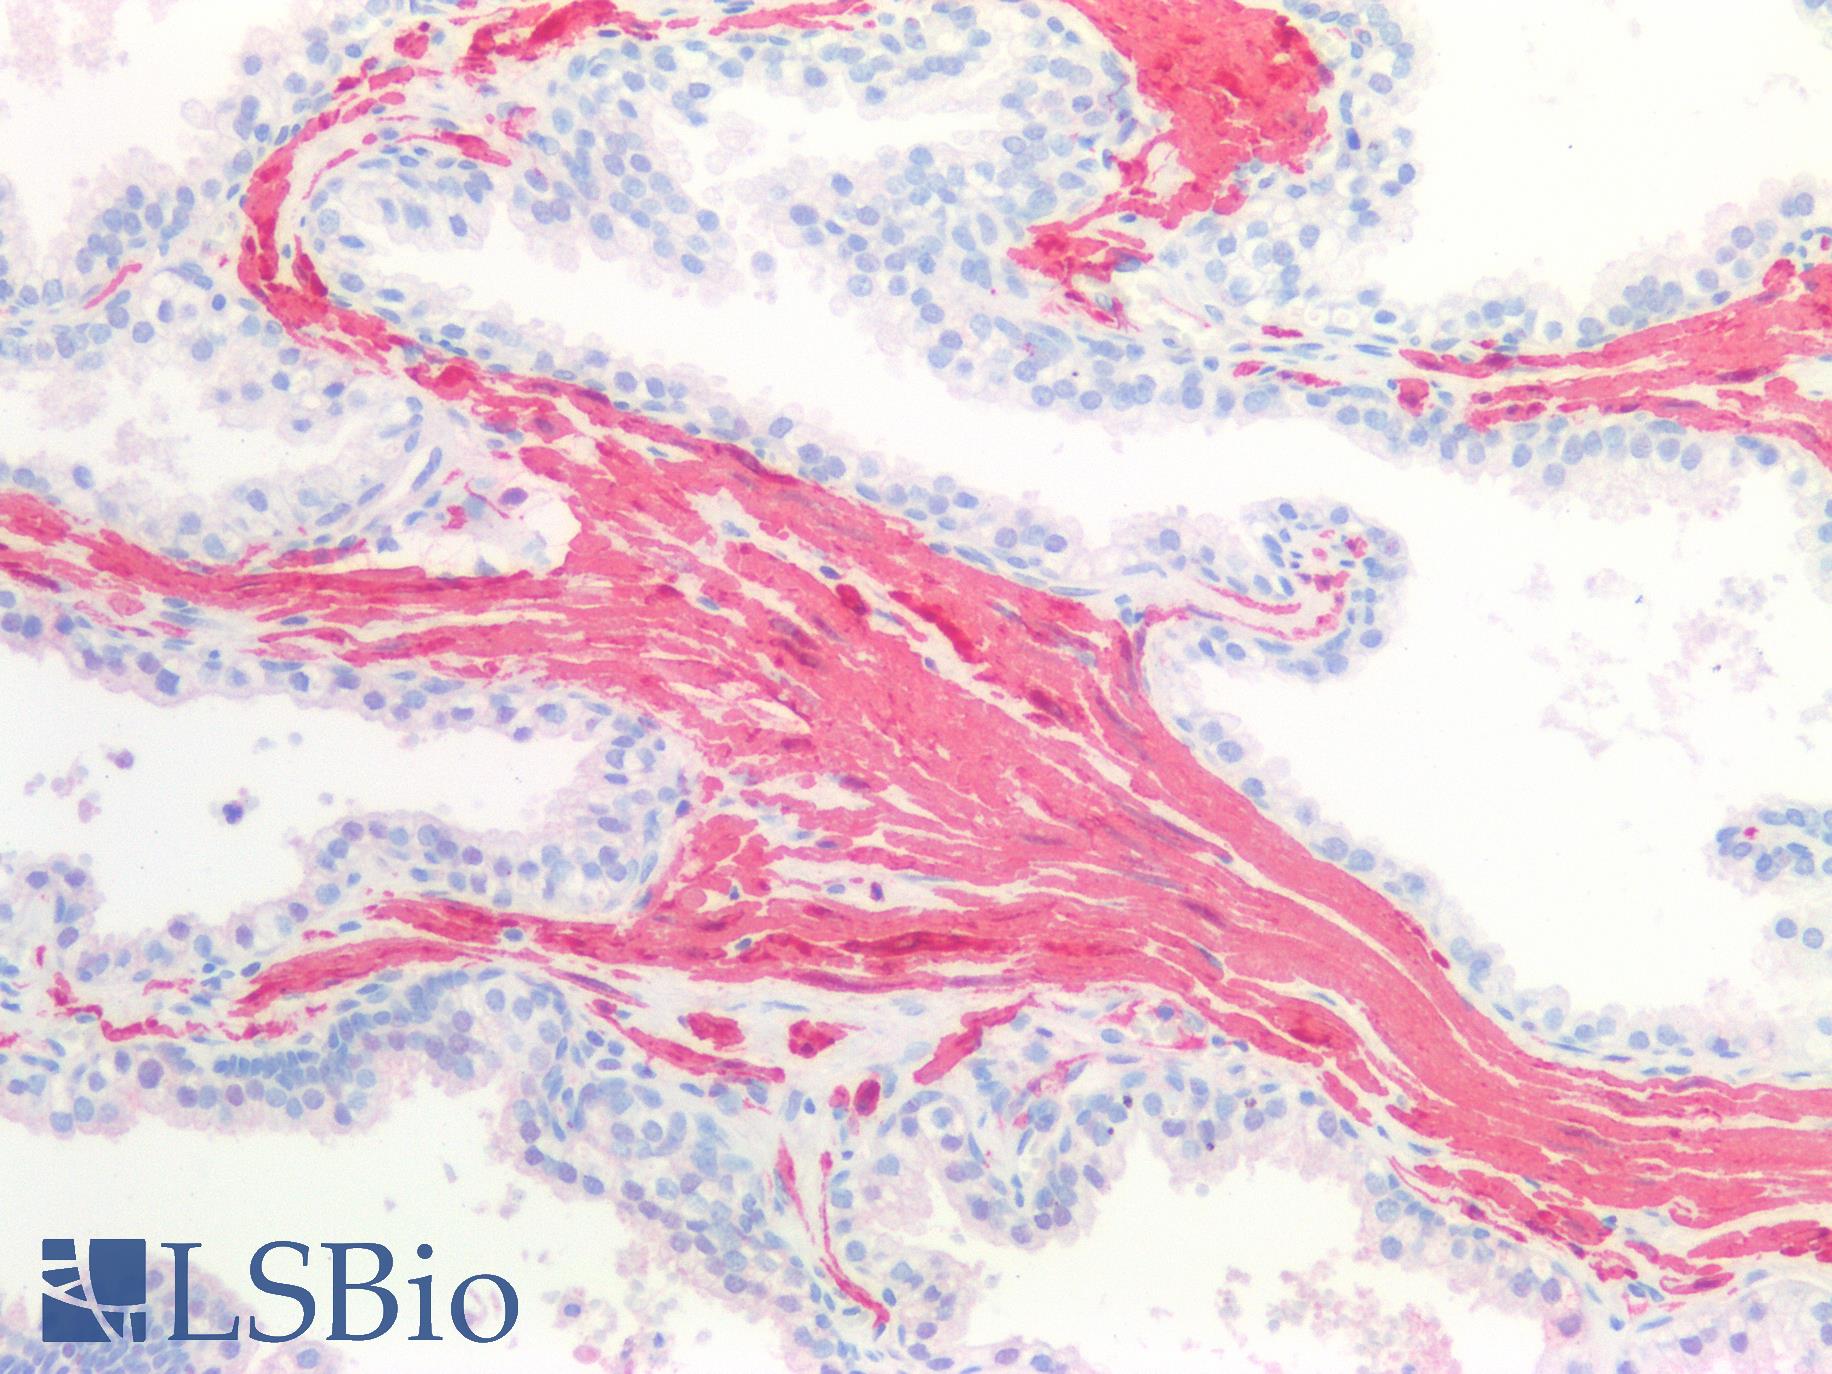 CNN1 / Calponin Antibody - Human Prostate Smooth Muscle: Formalin-Fixed, Paraffin-Embedded (FFPE)